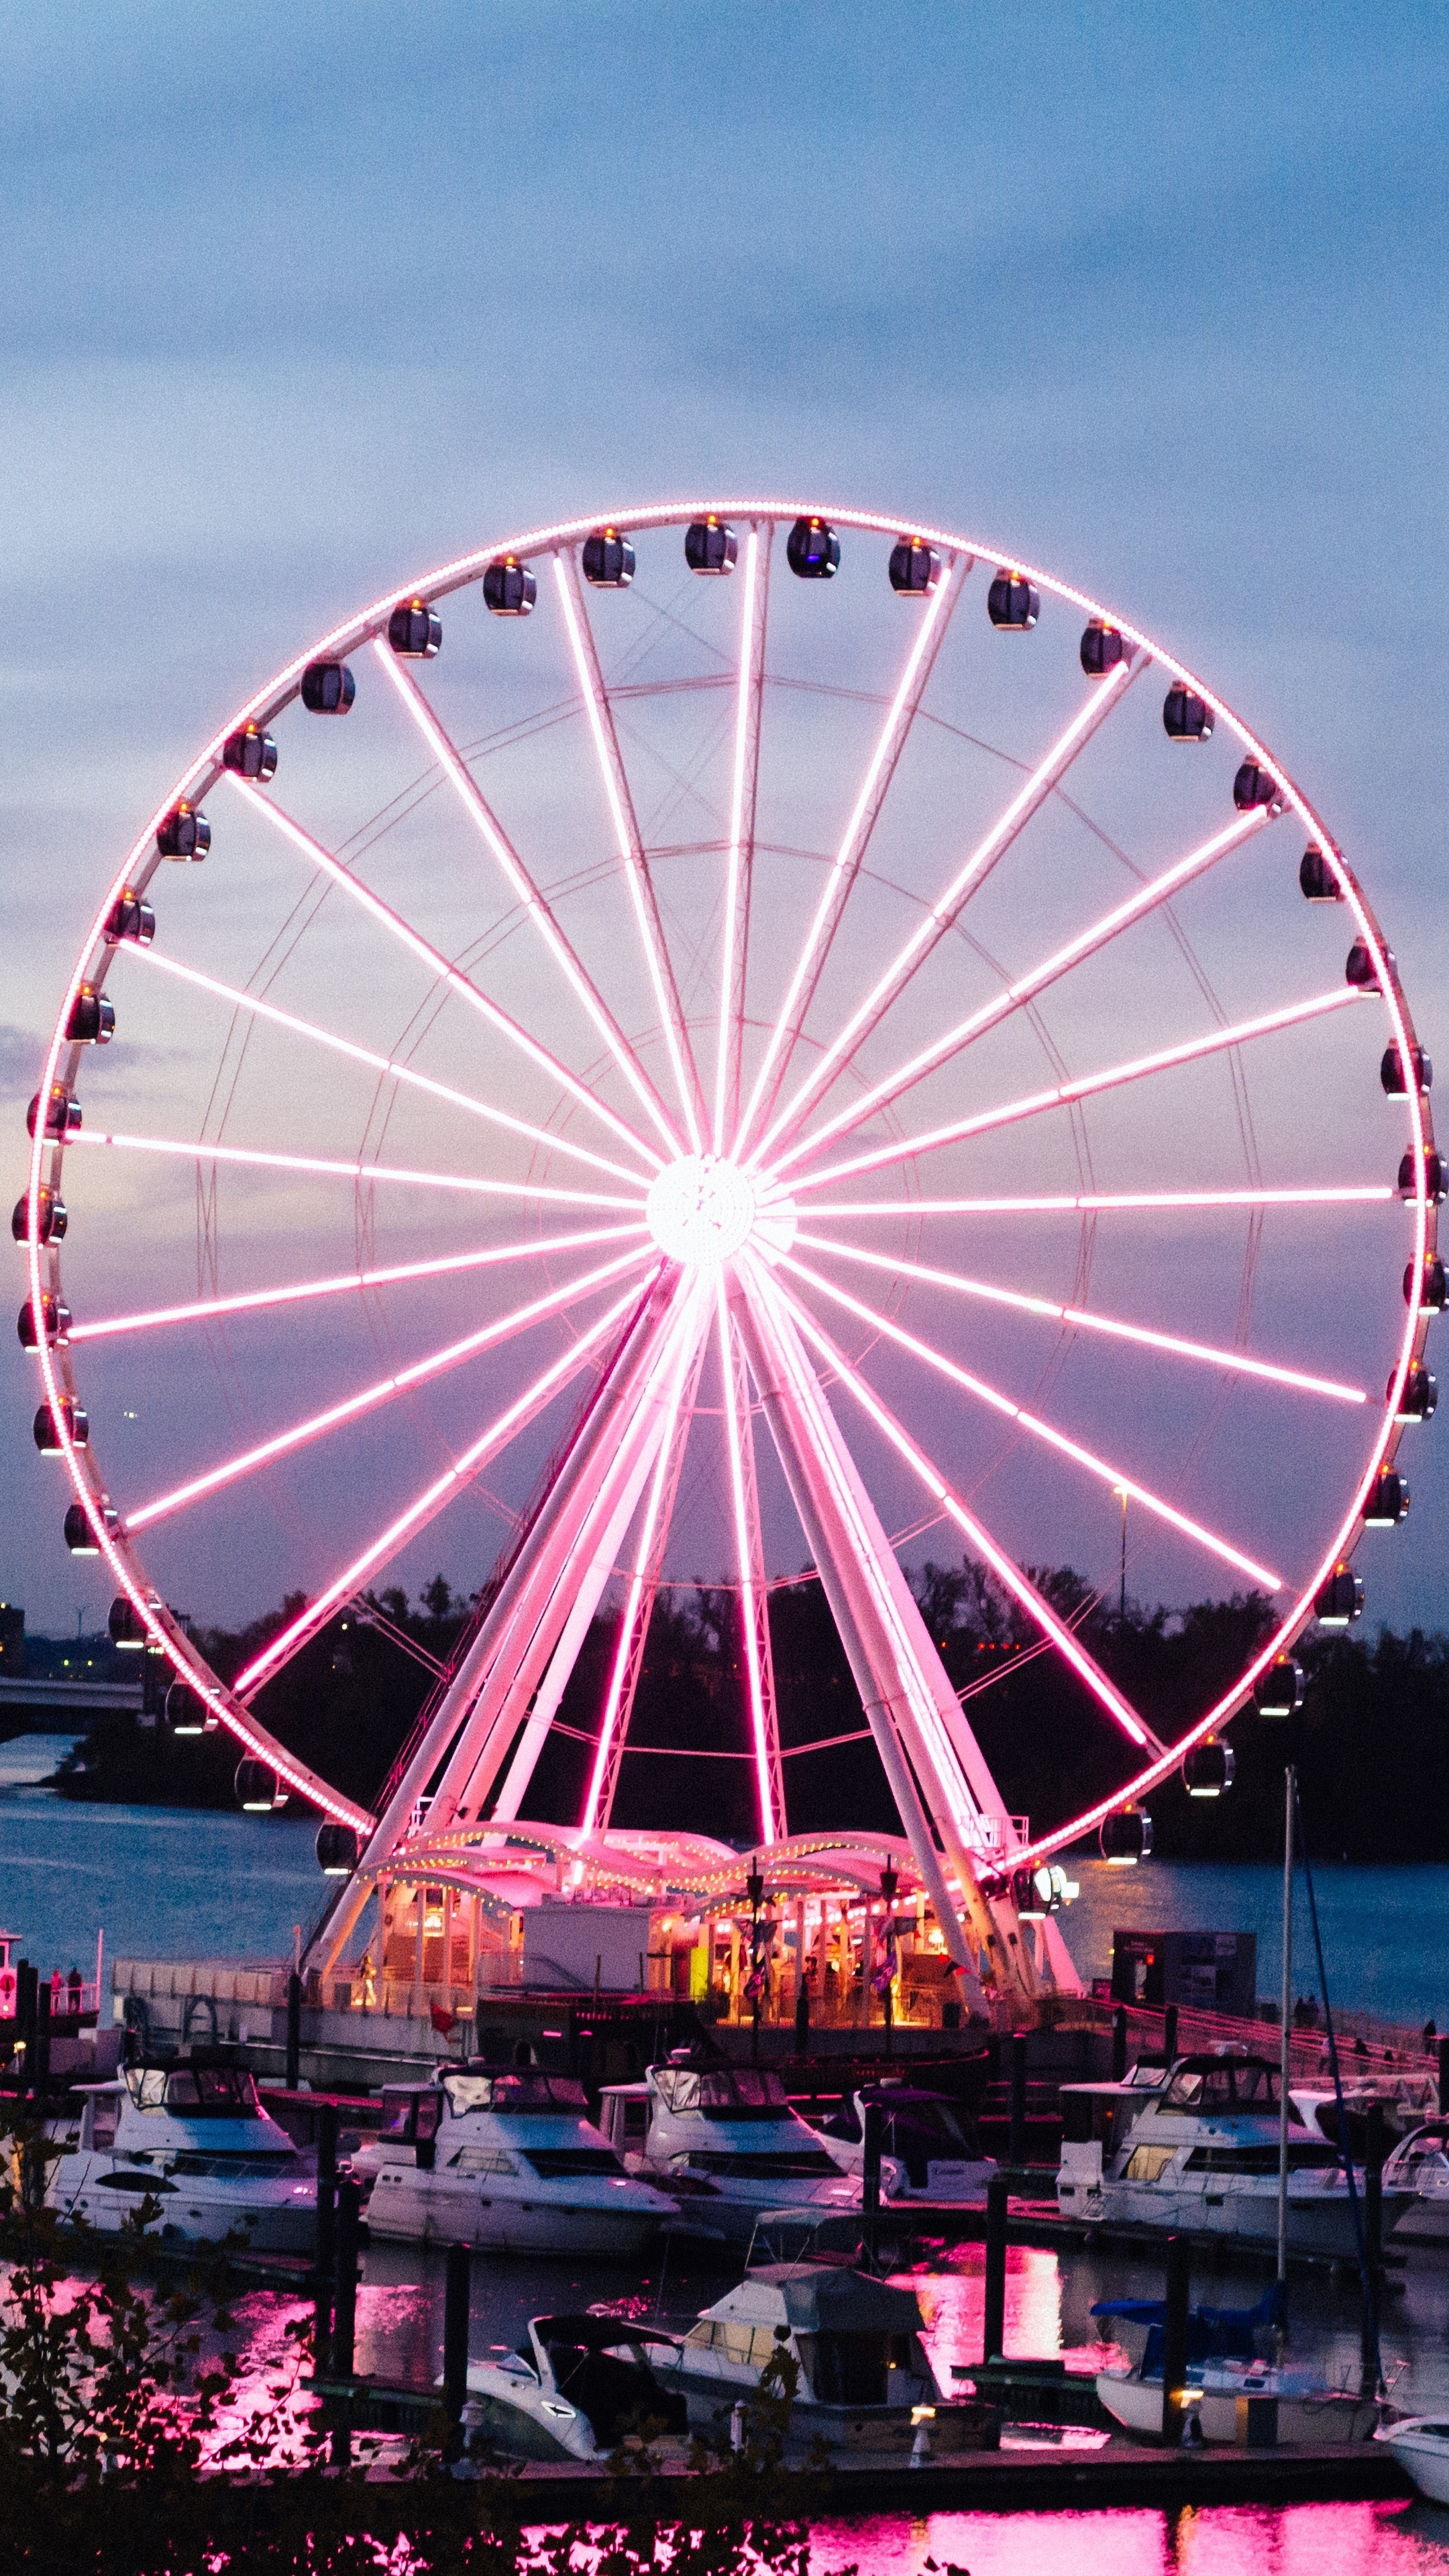 The Capital Wheel, Xperia wallpaper, HD 4K, Photos and pictures, 2160x3840 4K Phone